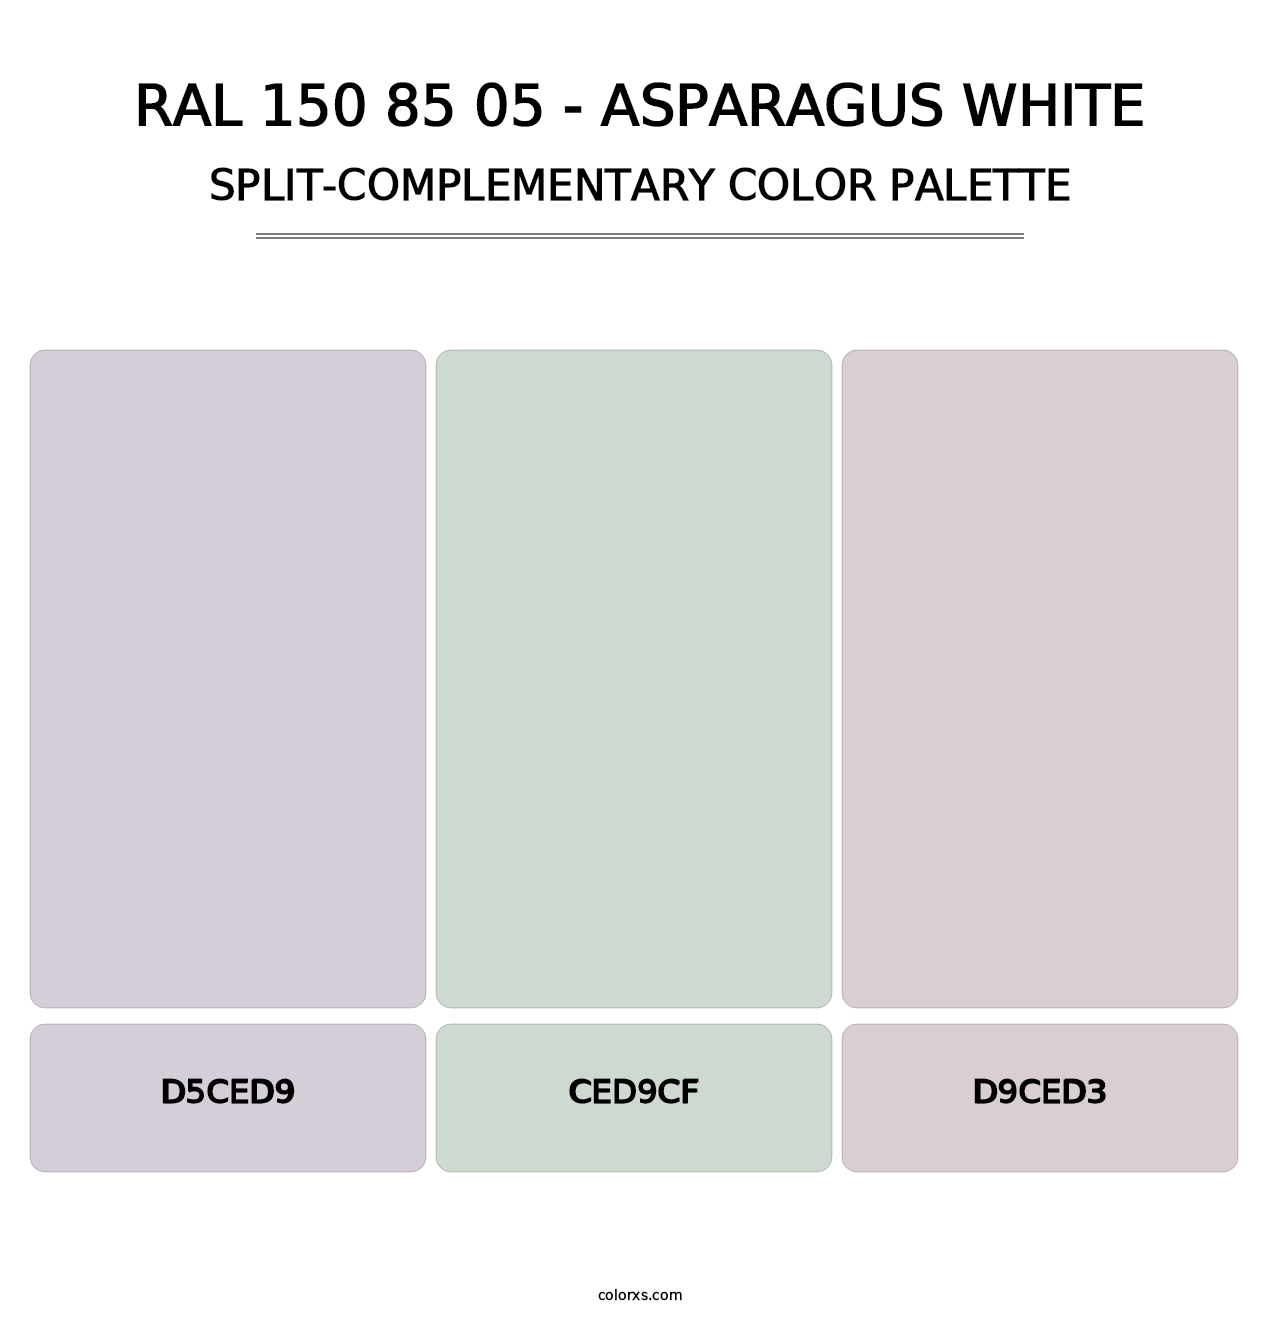 RAL 150 85 05 - Asparagus White - Split-Complementary Color Palette